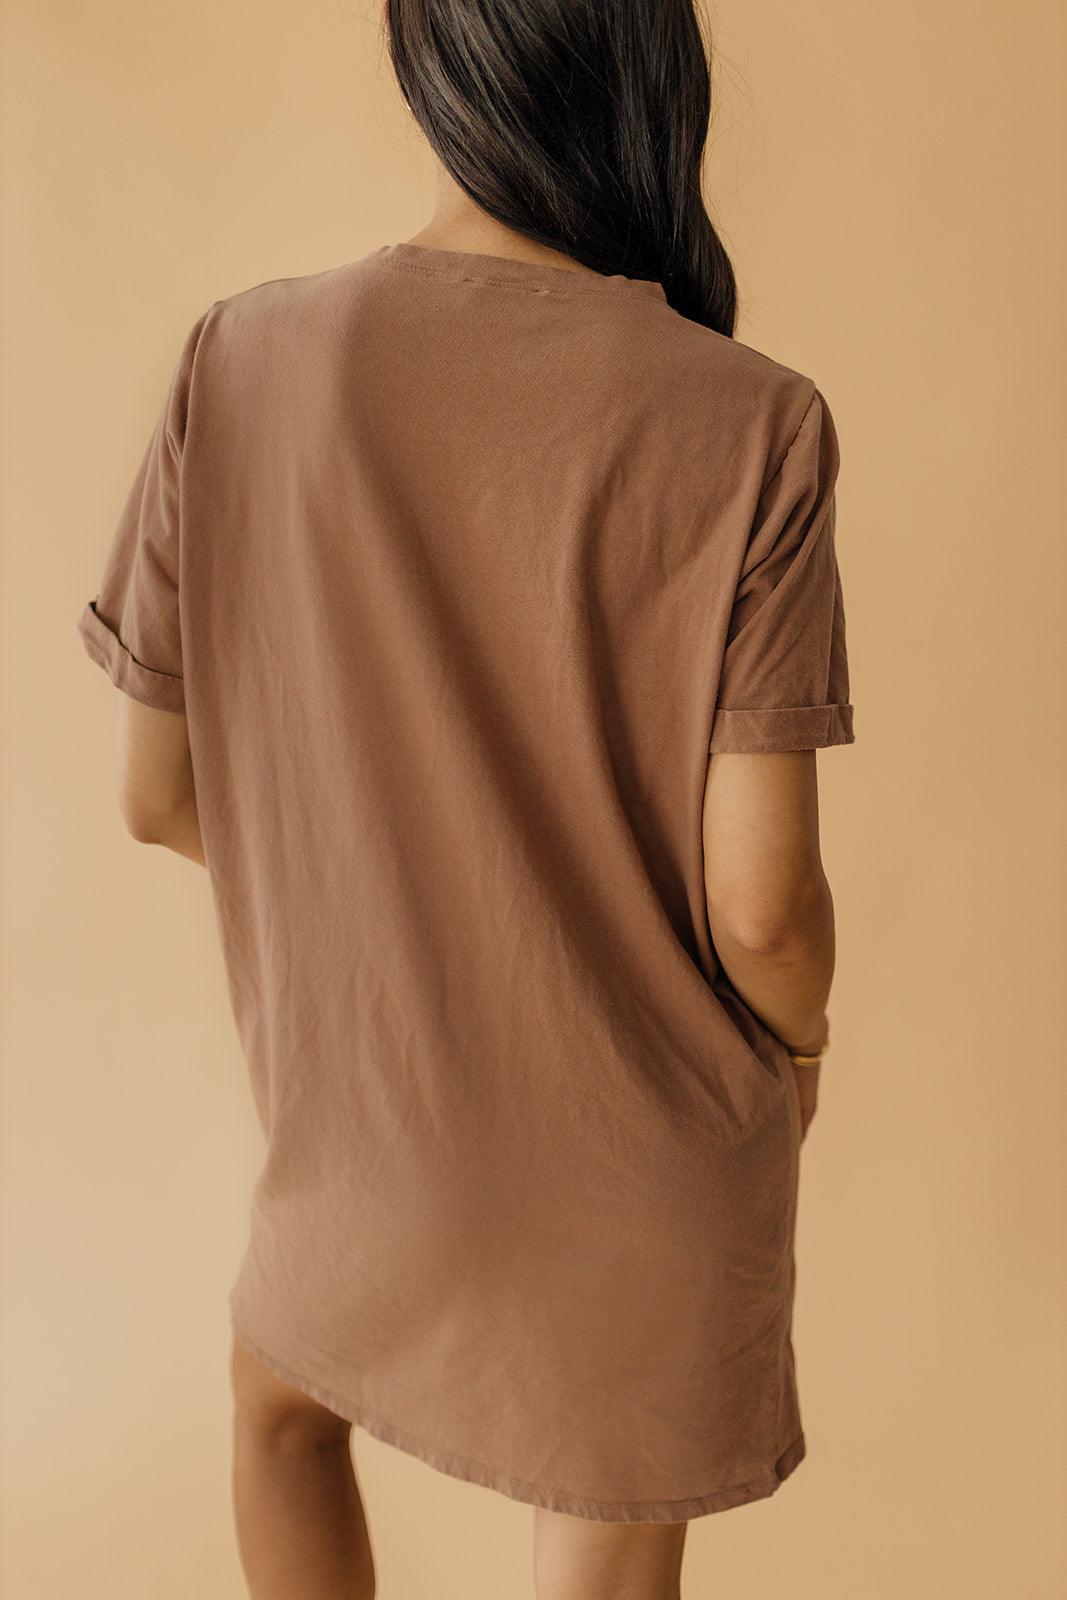 THE EASY DOES IT POCKET T-SHIRT DRESS BY PINK DESERT IN MOCHA